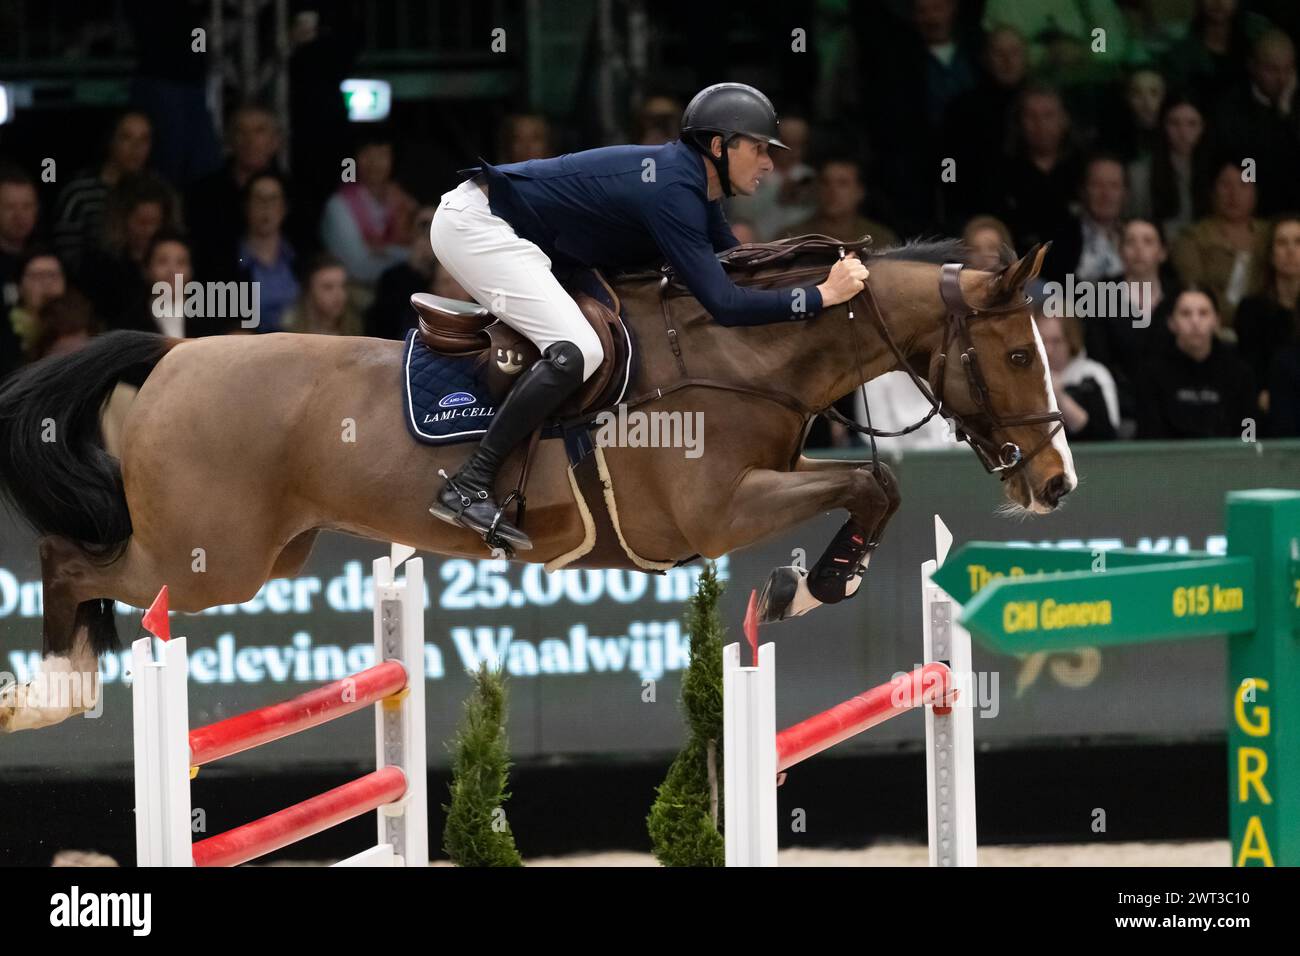 Denbosch, Netherlands - March 10, 2024. Gregory Wathelet of Belgium riding Ace Of Hearts competes in the 1.60m Rolex Grand Prix at the 2024 Rolex Dutc Stock Photo